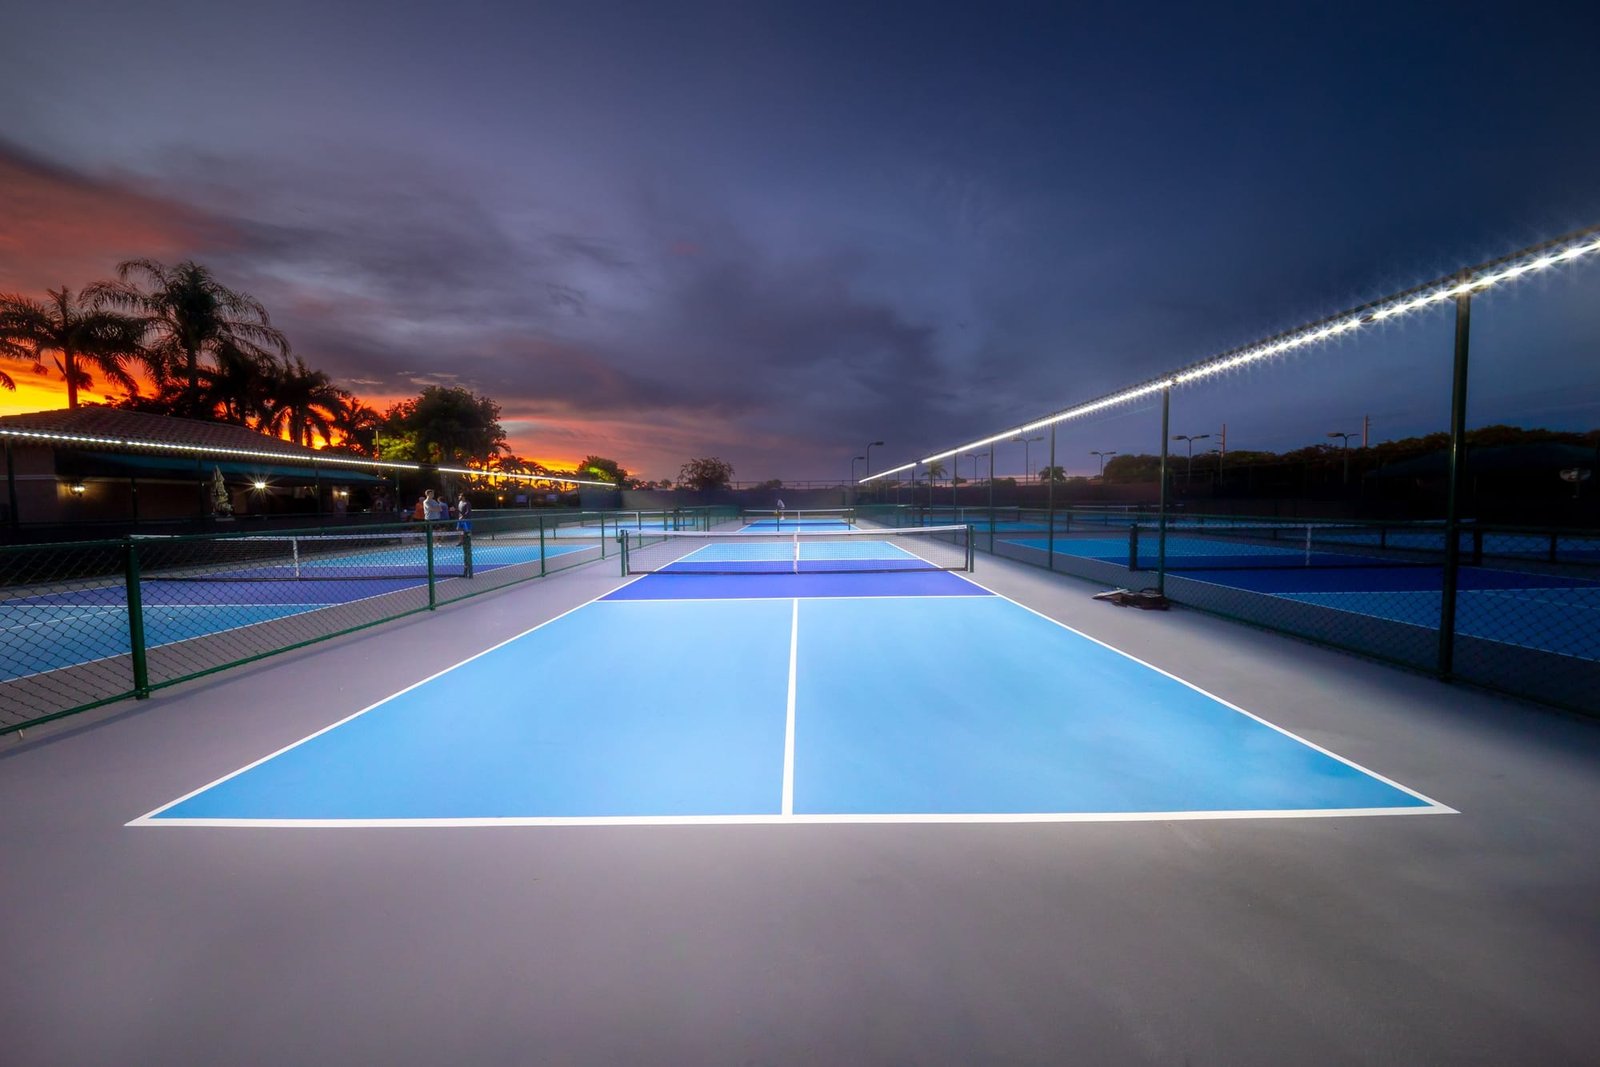 Looking To Get In Some Pickleball After Dark? One Lighting Solution Stands Out